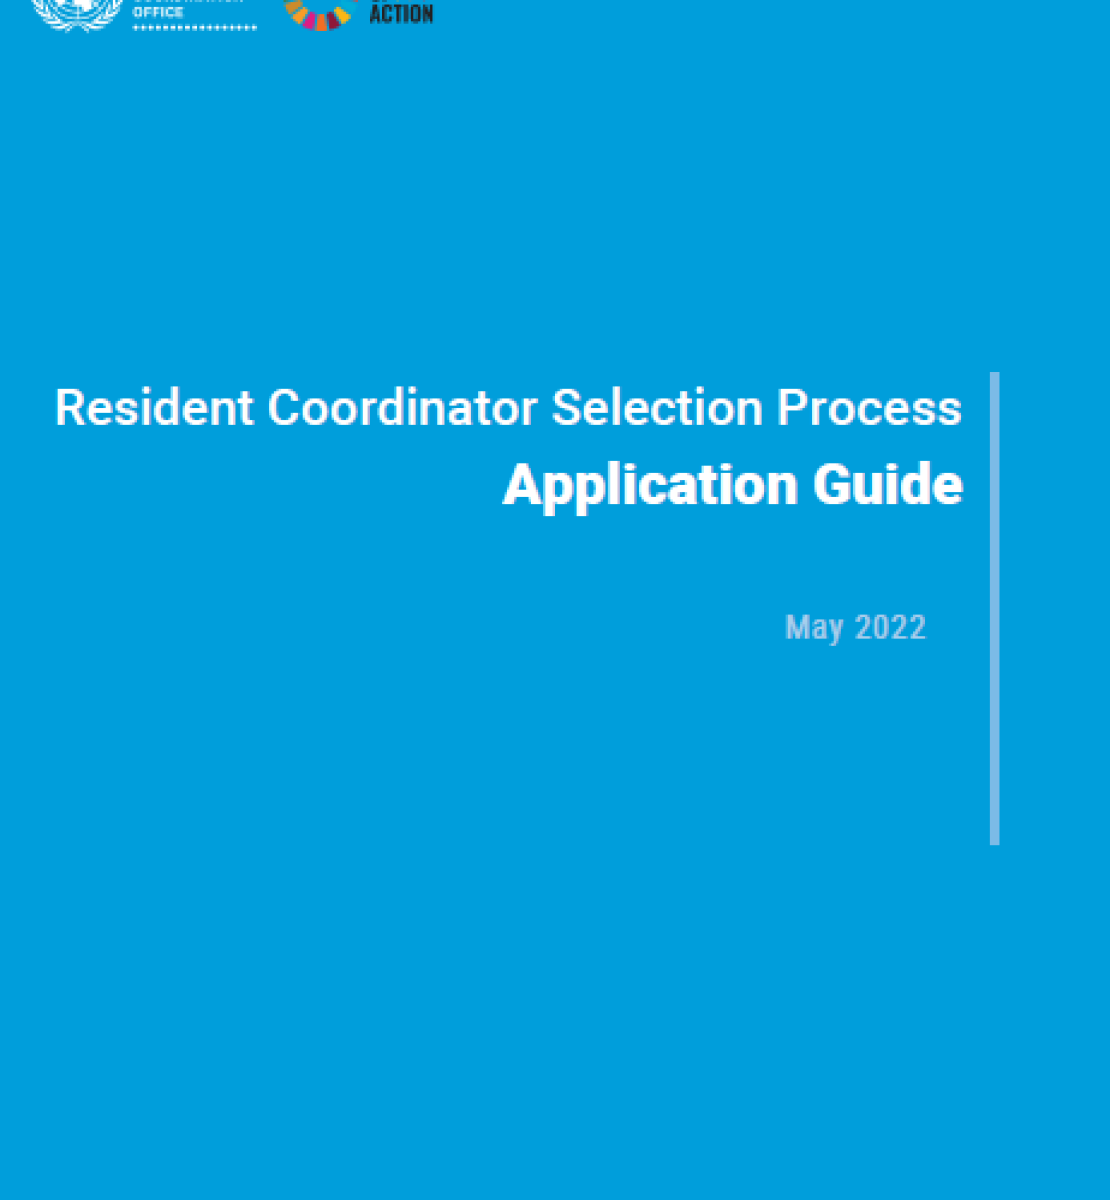 Report Cover_RCs selection process May 2022